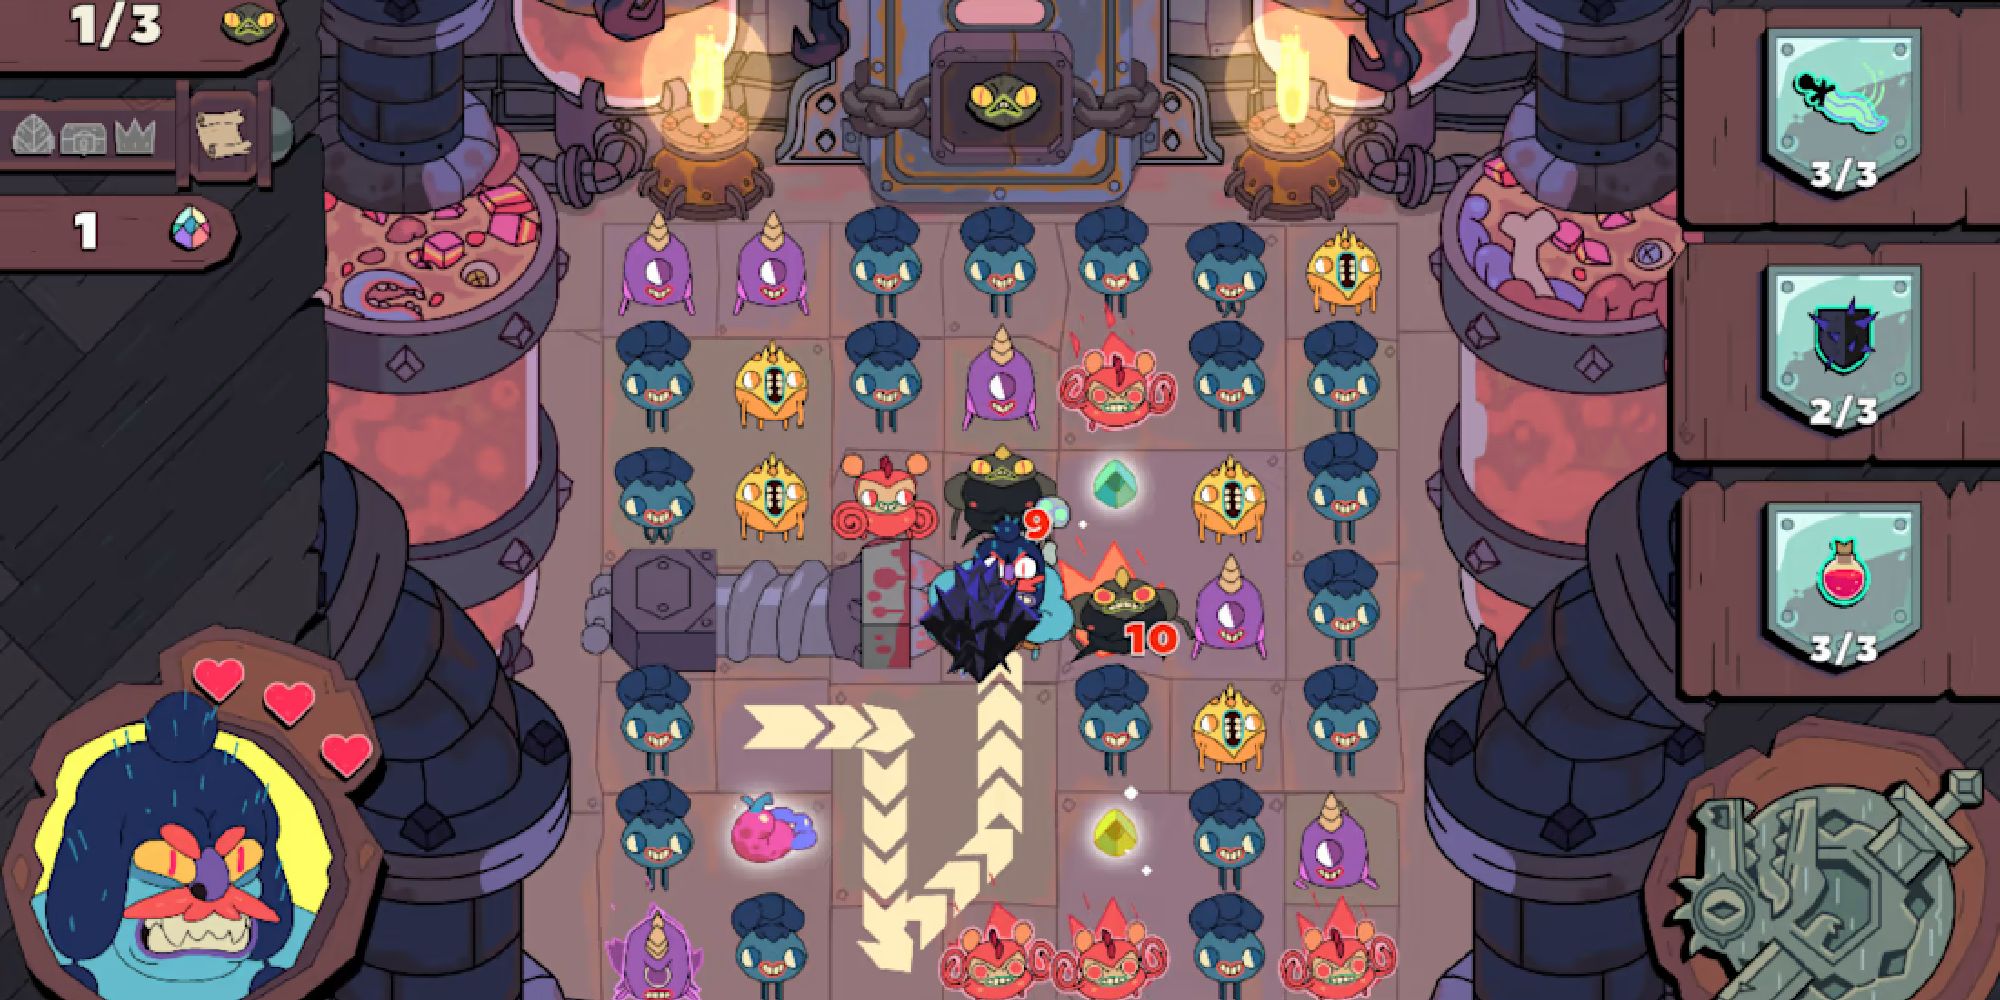 gameplay for grindstone with player in mid-move on board